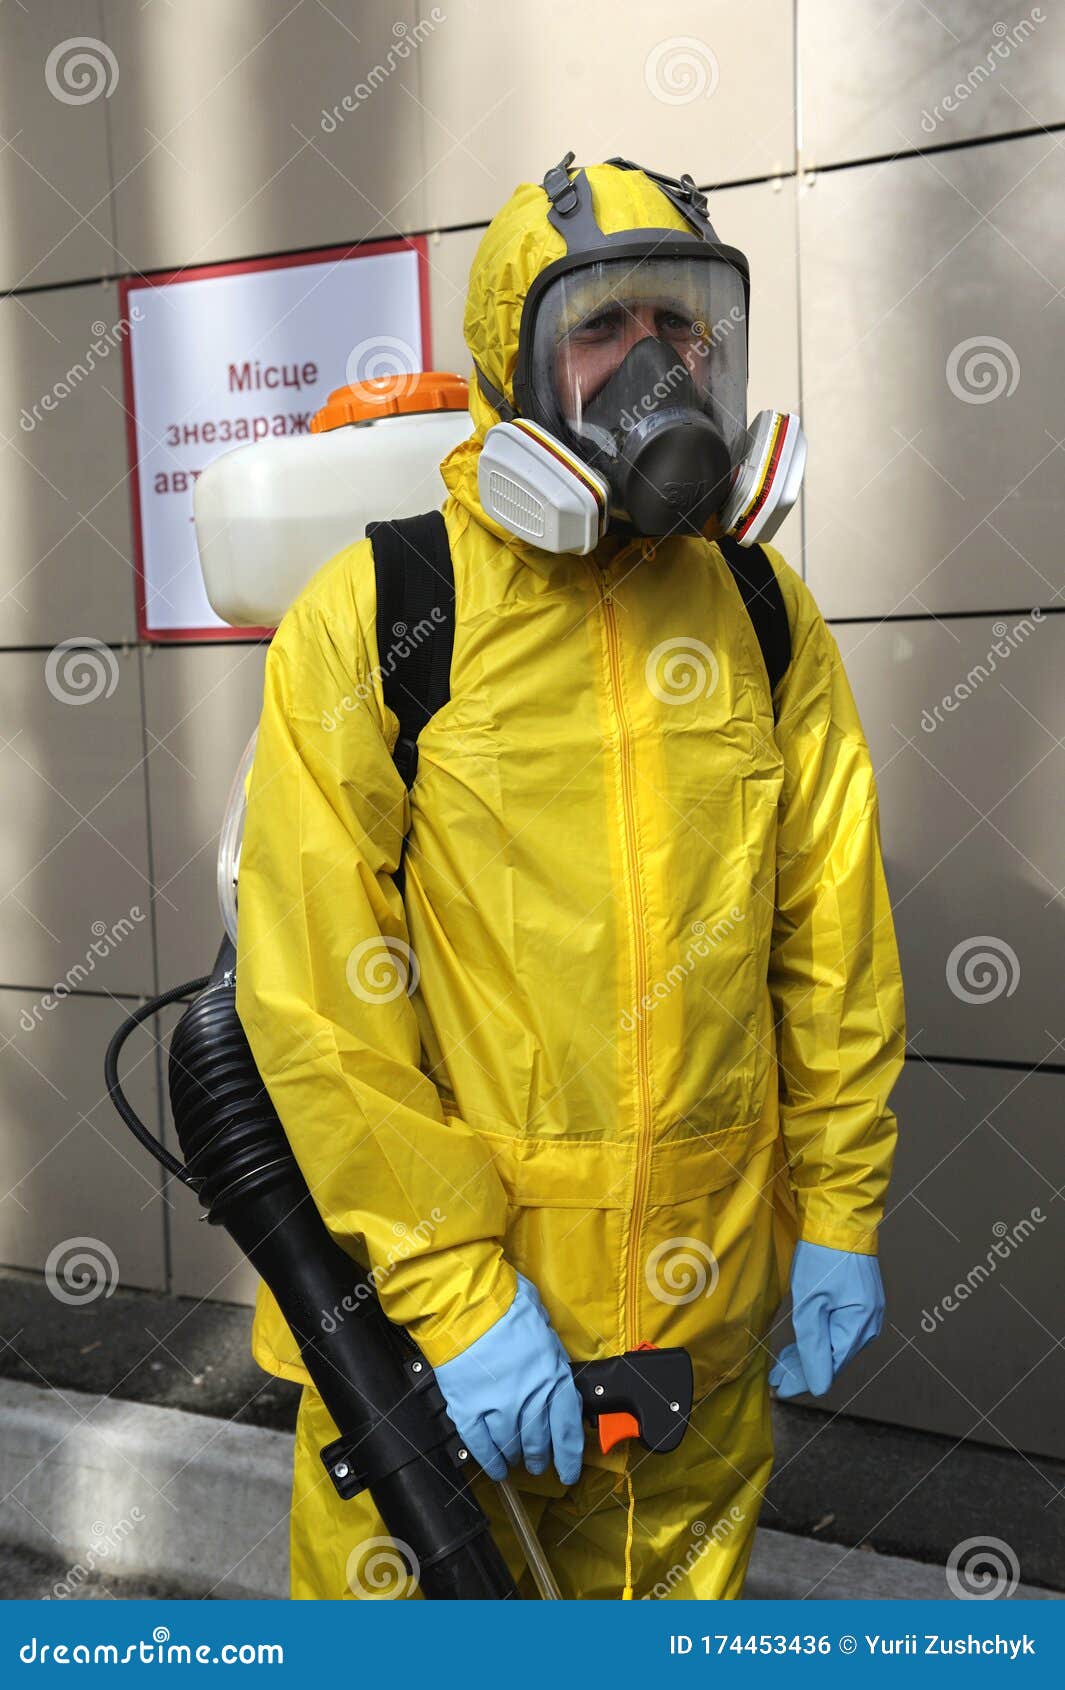 Download Paramedic Wearing Yellow Protective Costume And Mask Disinfecting Coronavirus With The Motorized Backpack Atomizer And Sprayer Editorial Photo Image Of Decontamination Protection 174453436 PSD Mockup Templates